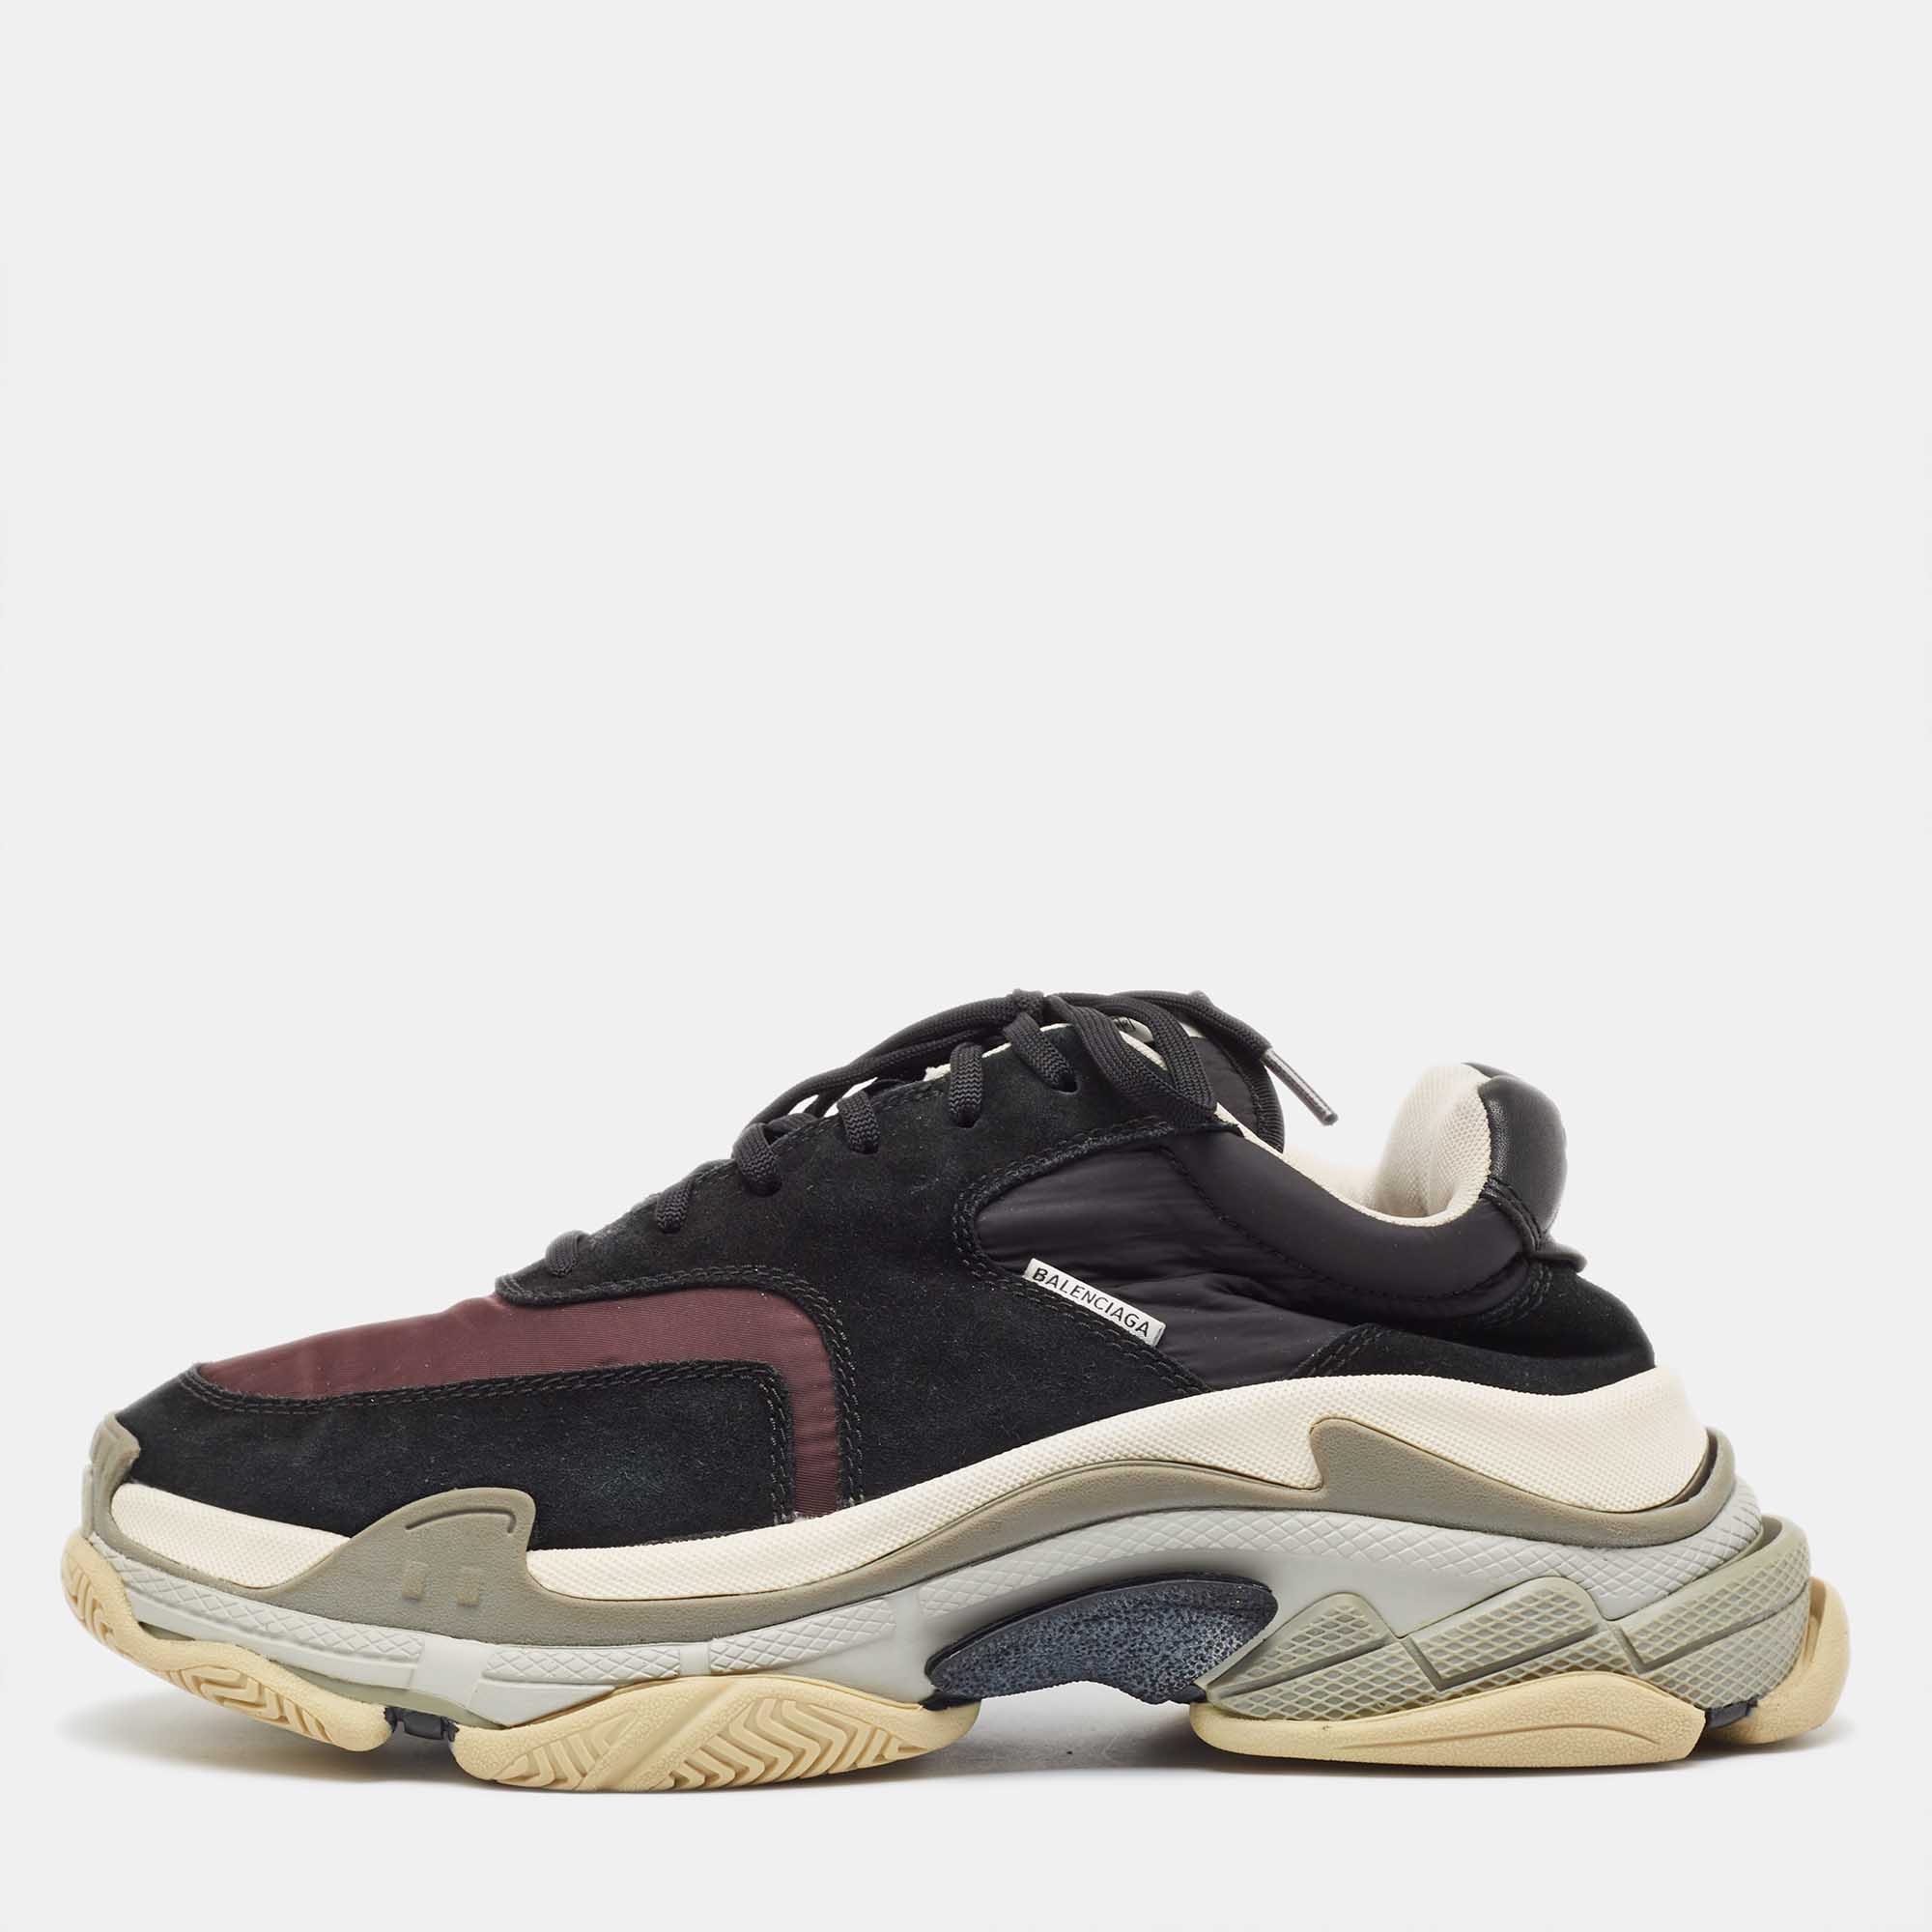 Pre-owned Balenciaga Black/burgundy Suede Leather And Fabric Triple S Low Top Sneakers Size 44